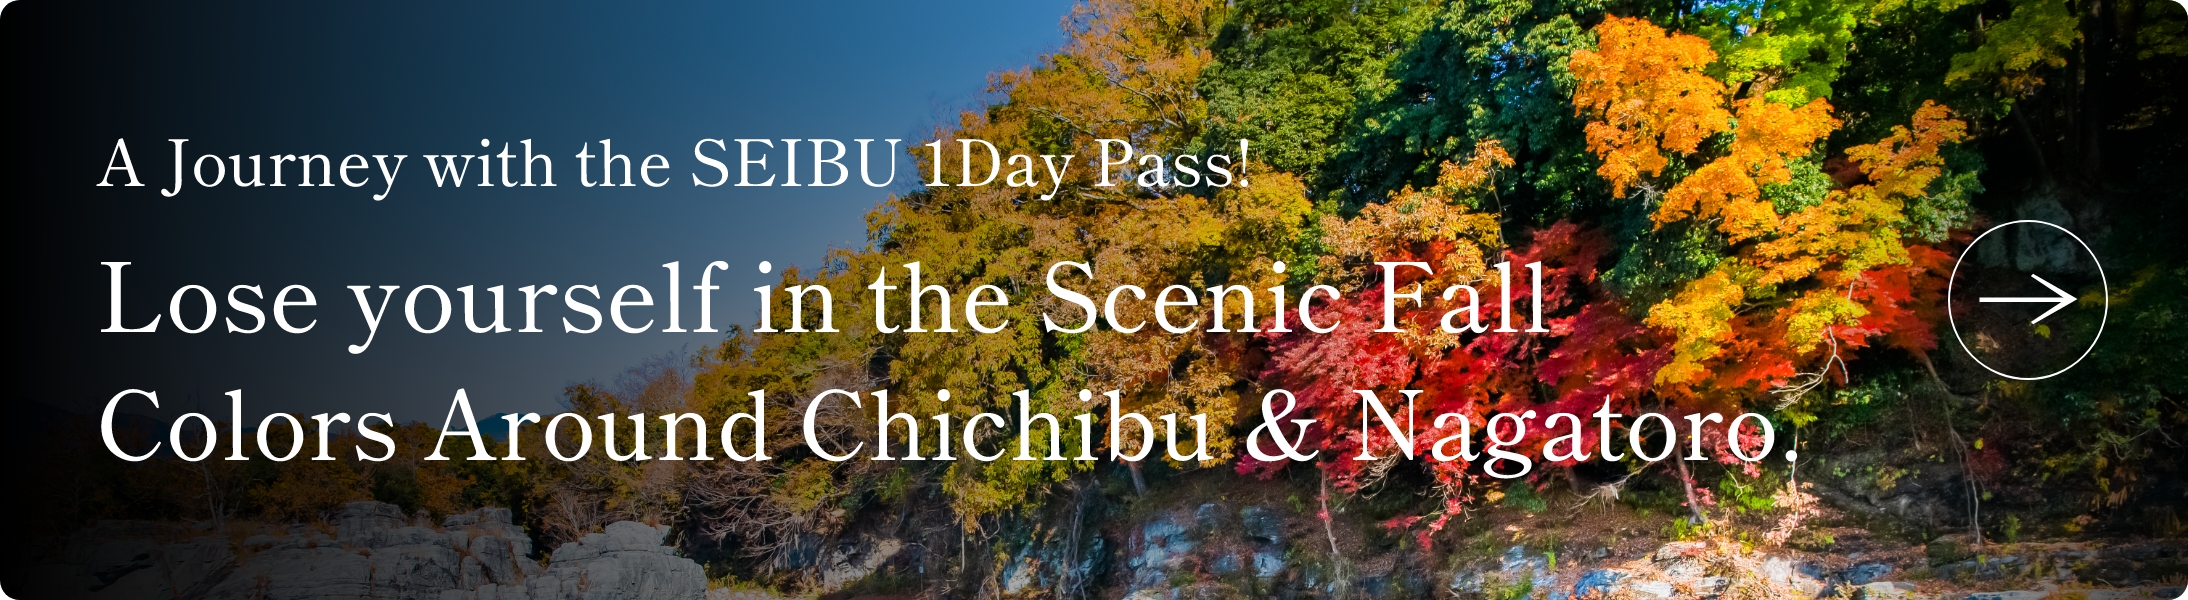 A Journey with the SEIBU 1Day Pass!<br>Lose yourself in the Scenic Fall Colors Around Chichibu & Nagatoro.